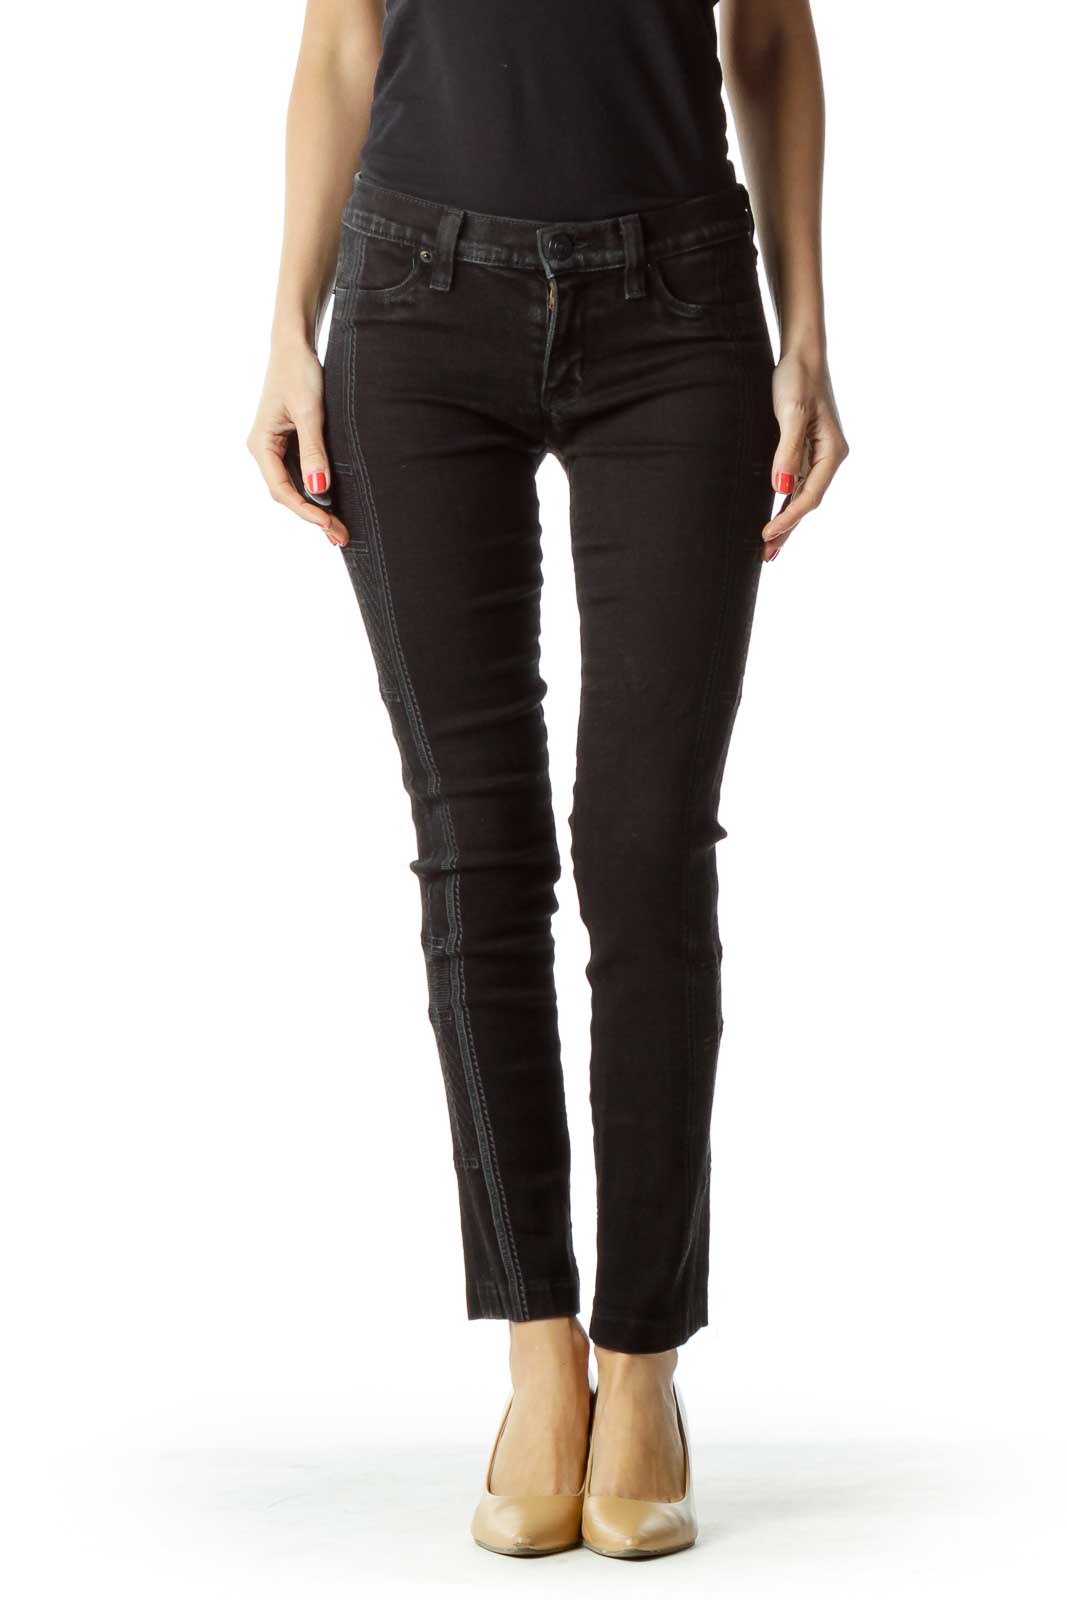 Black Embroidered Skinny Jean Front